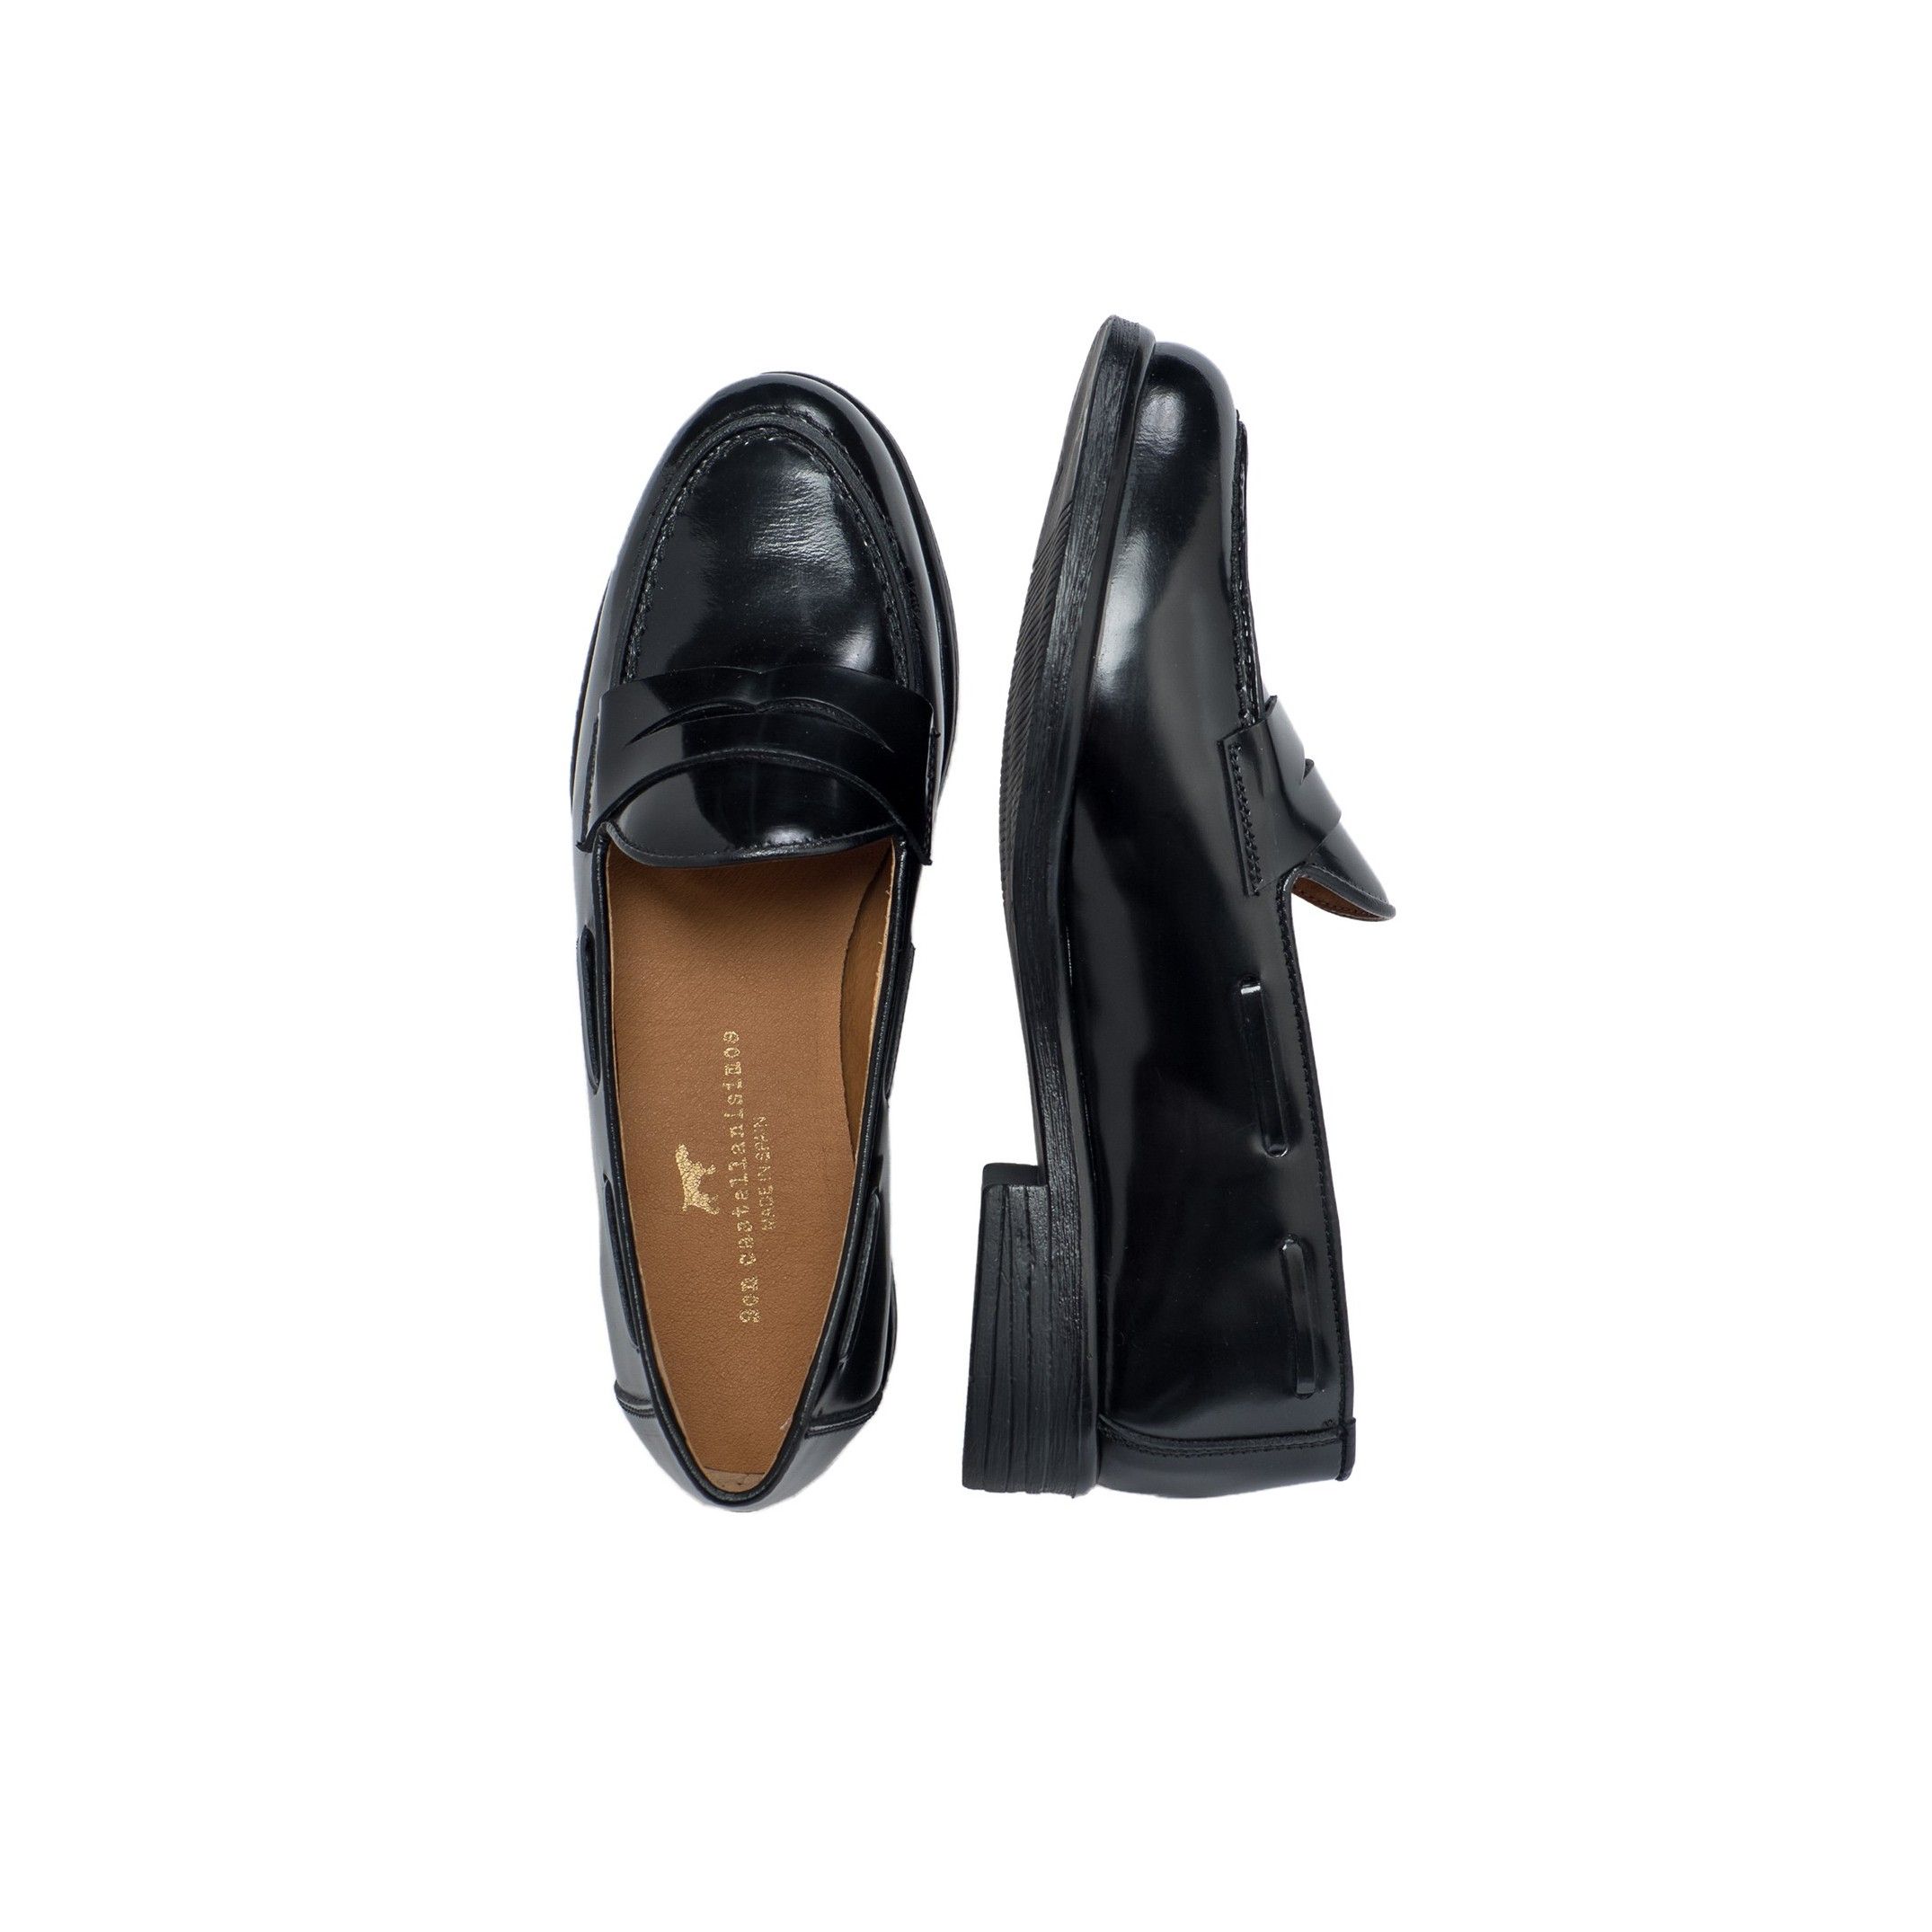 Leather loafers with mask for women, by Son Castellanisimos. Upper made of cowhide leather. Inner lining and insole: Antiallergic and keeps the inside of the footwear dry. Sole material: synthetic and non slip. Heel height: 2,5 cm. Designed and made in Spain.